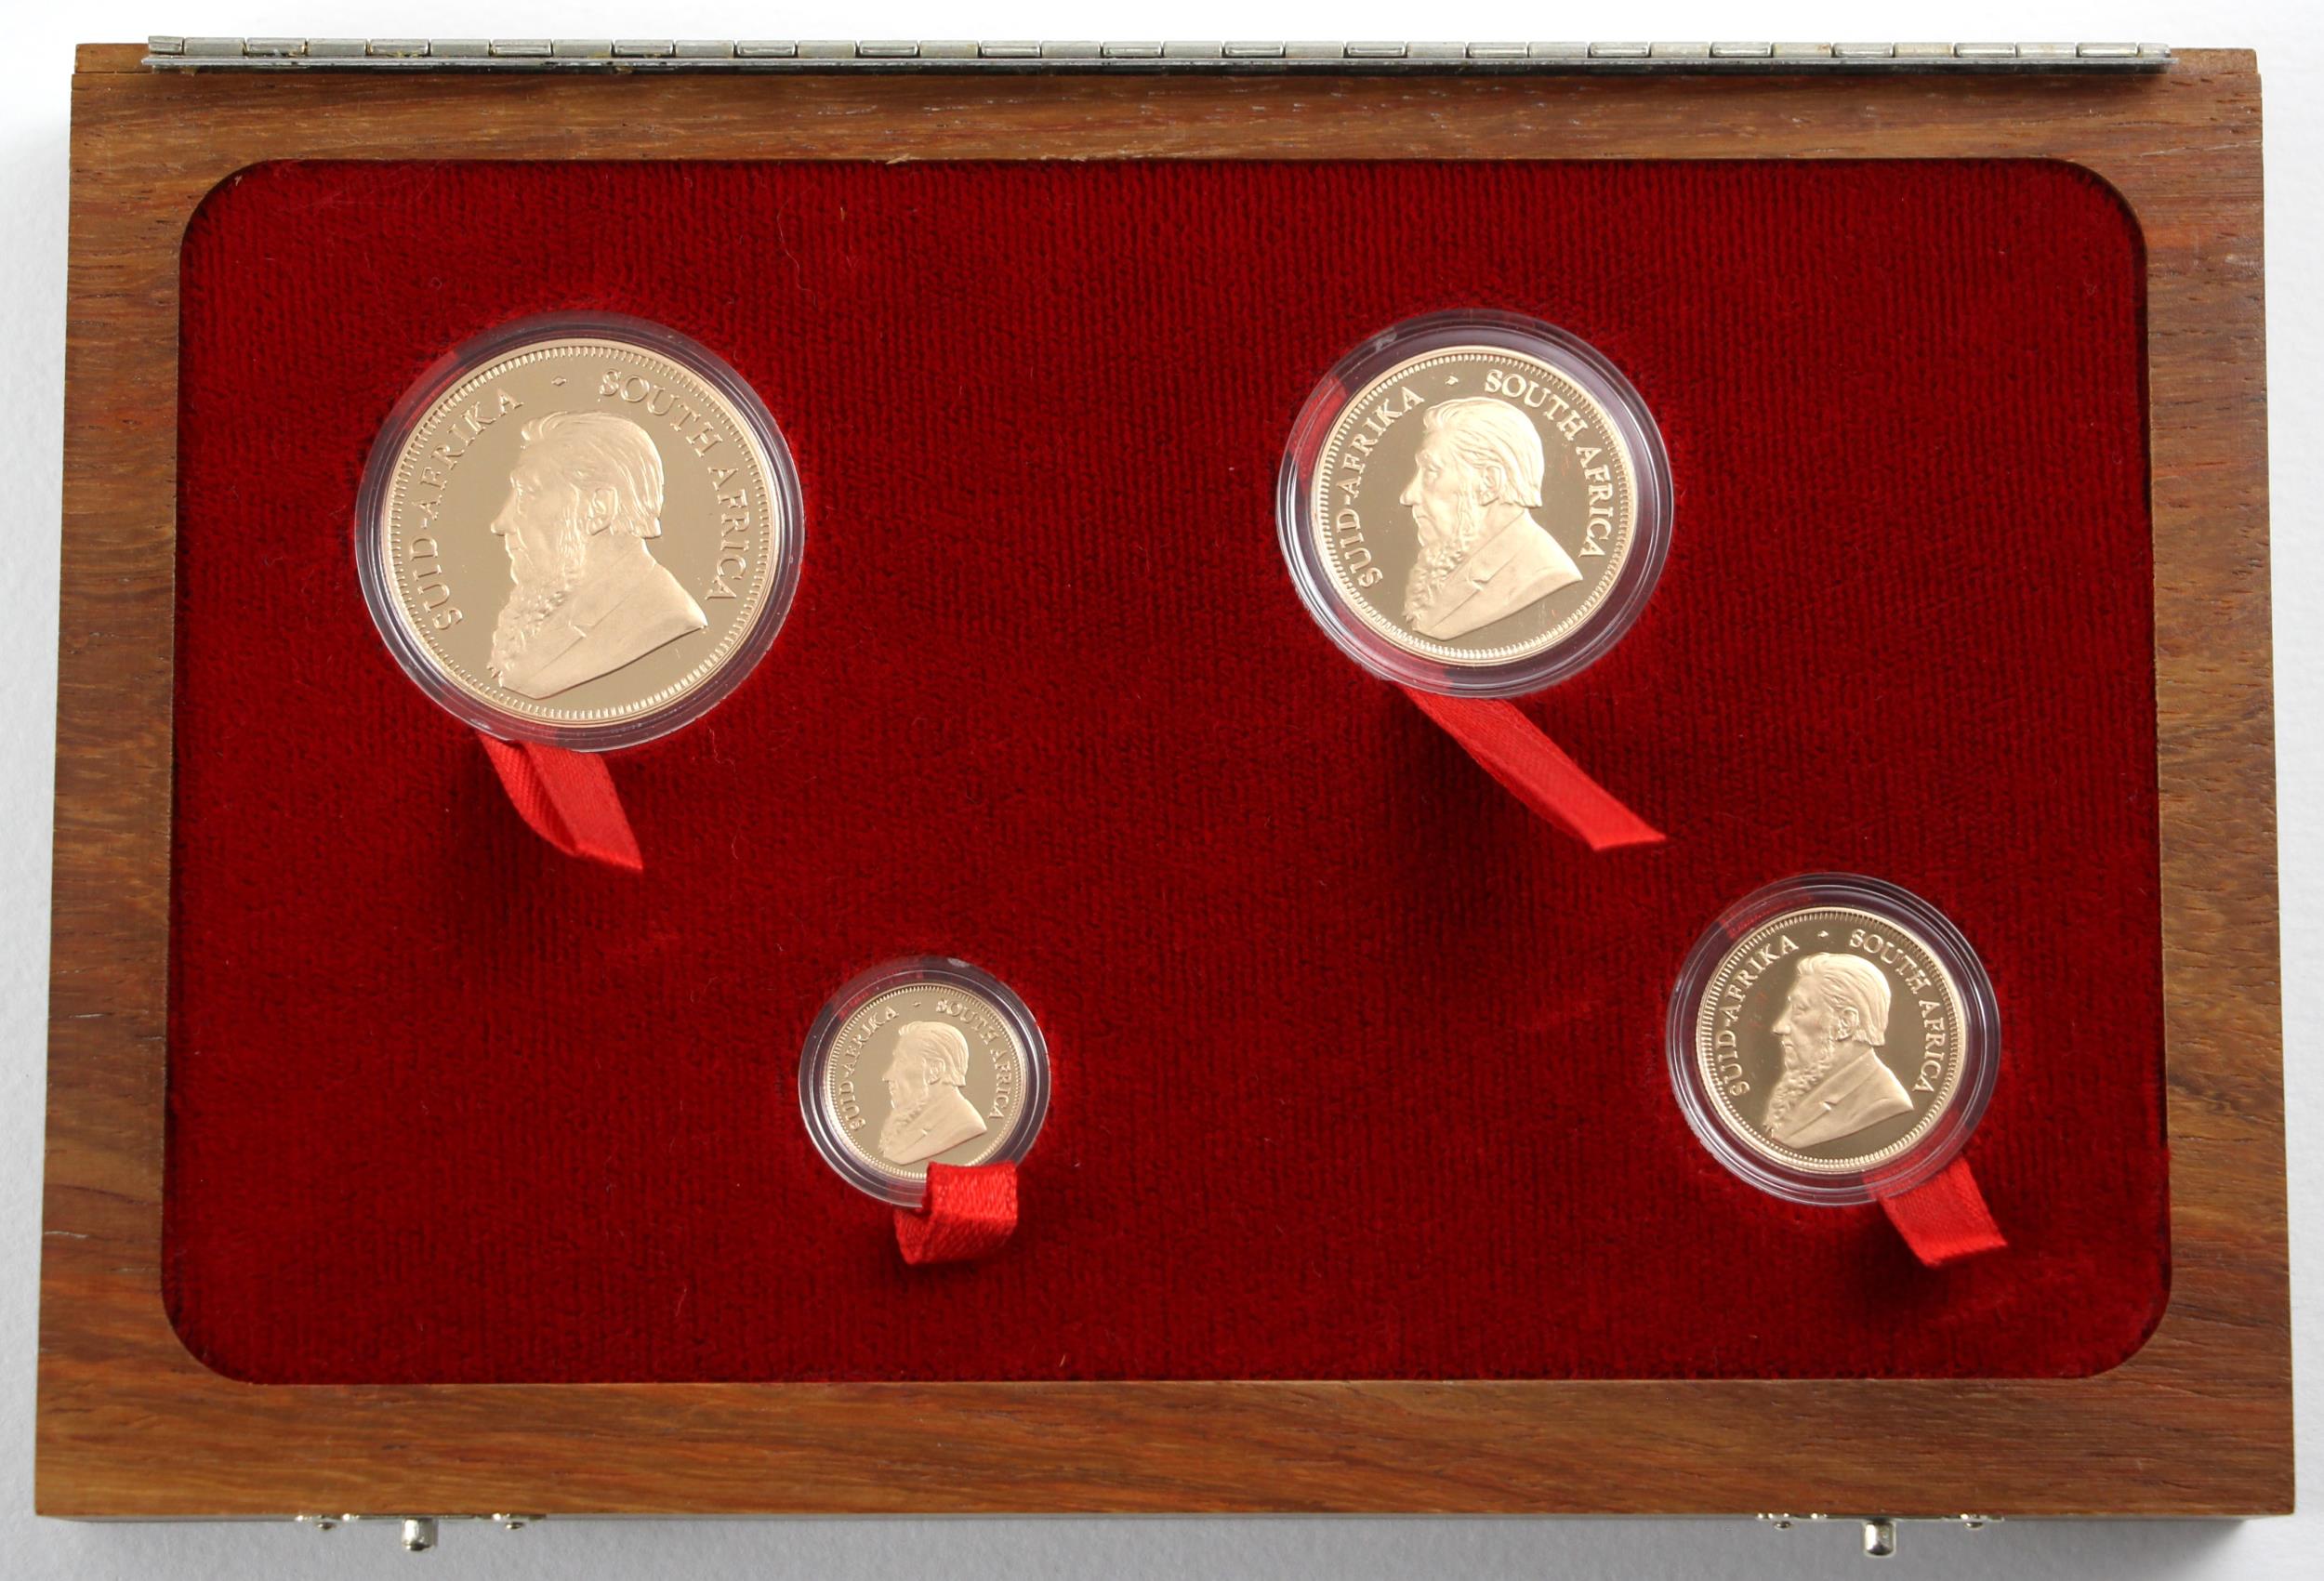 South Africa, Krugerrand collectors set, The 90th Birthday celebration of Queen Elizabeth II,